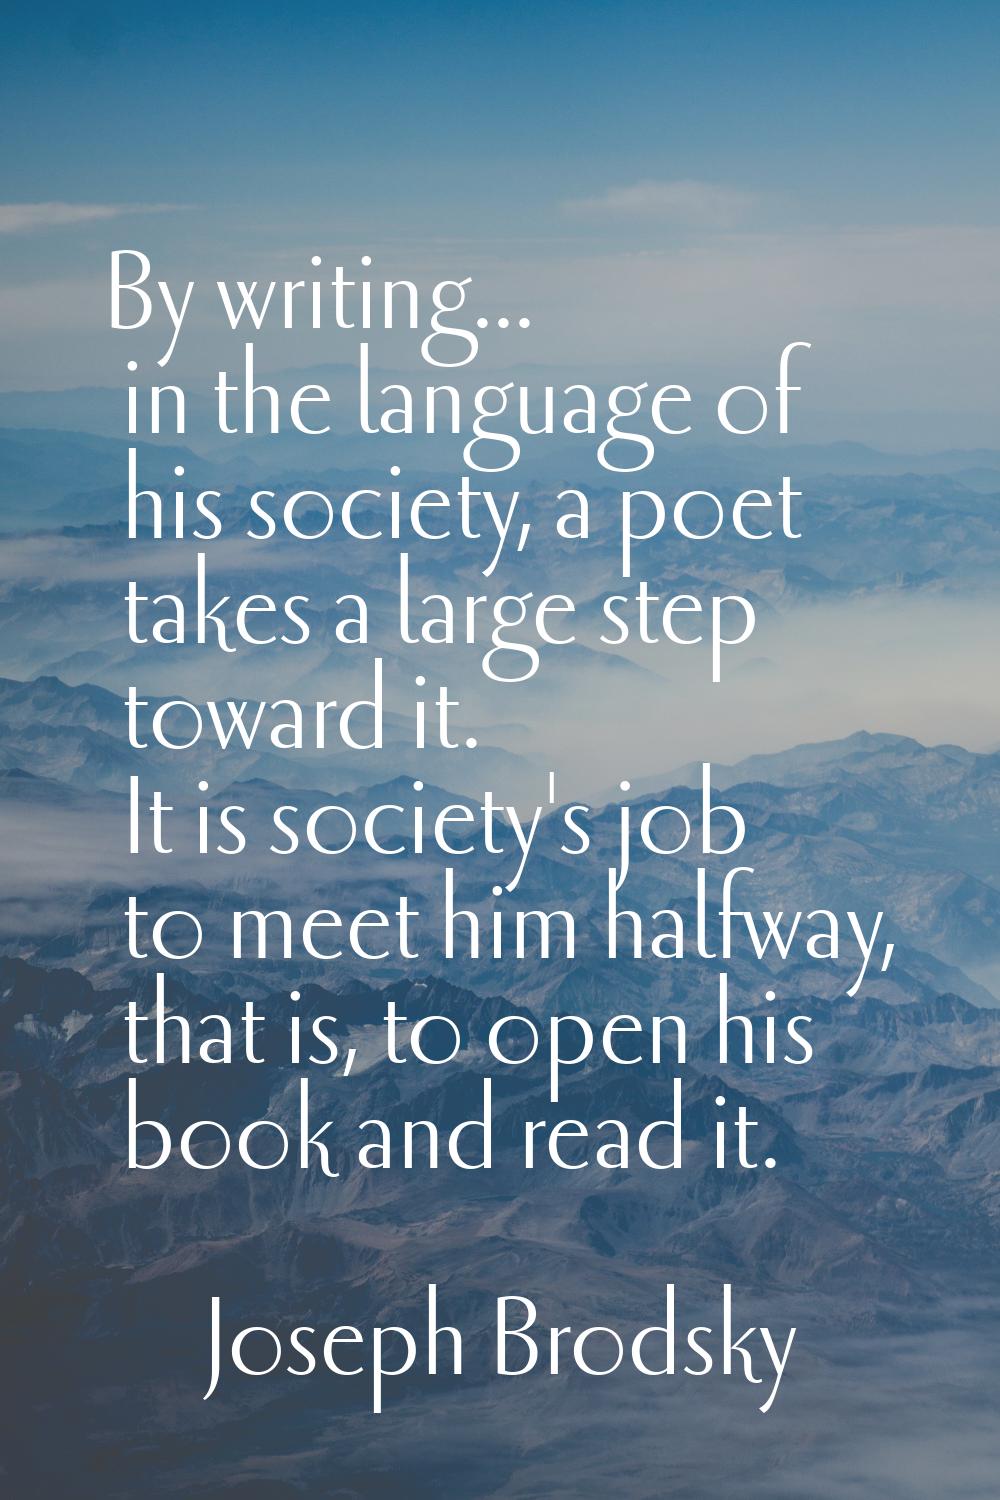 By writing... in the language of his society, a poet takes a large step toward it. It is society's 